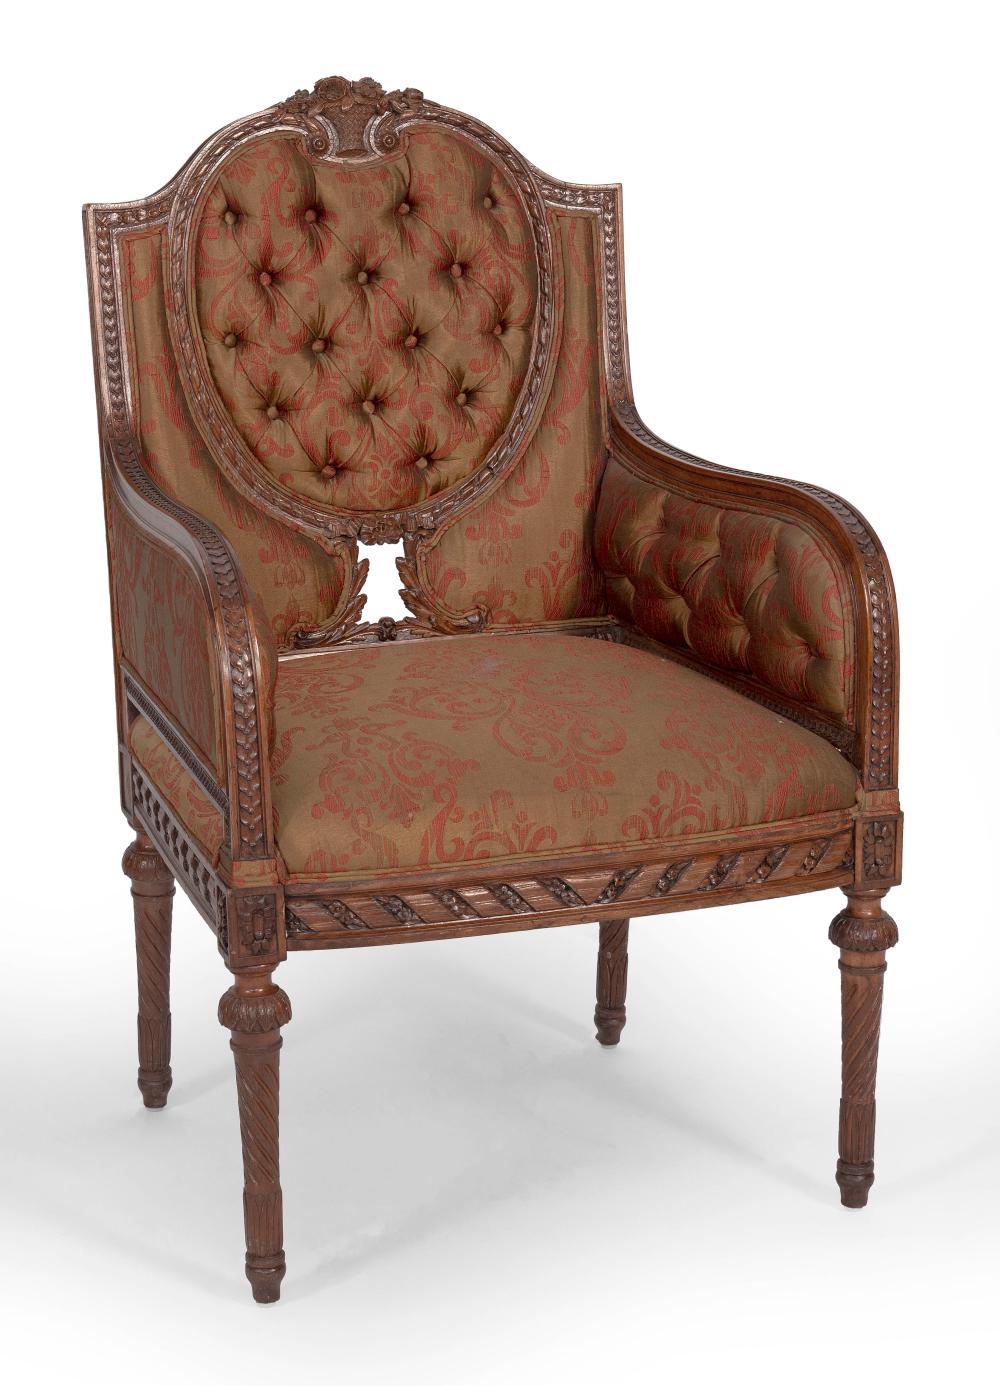 ARMCHAIR, POSSIBLY HERTER BROTHERS